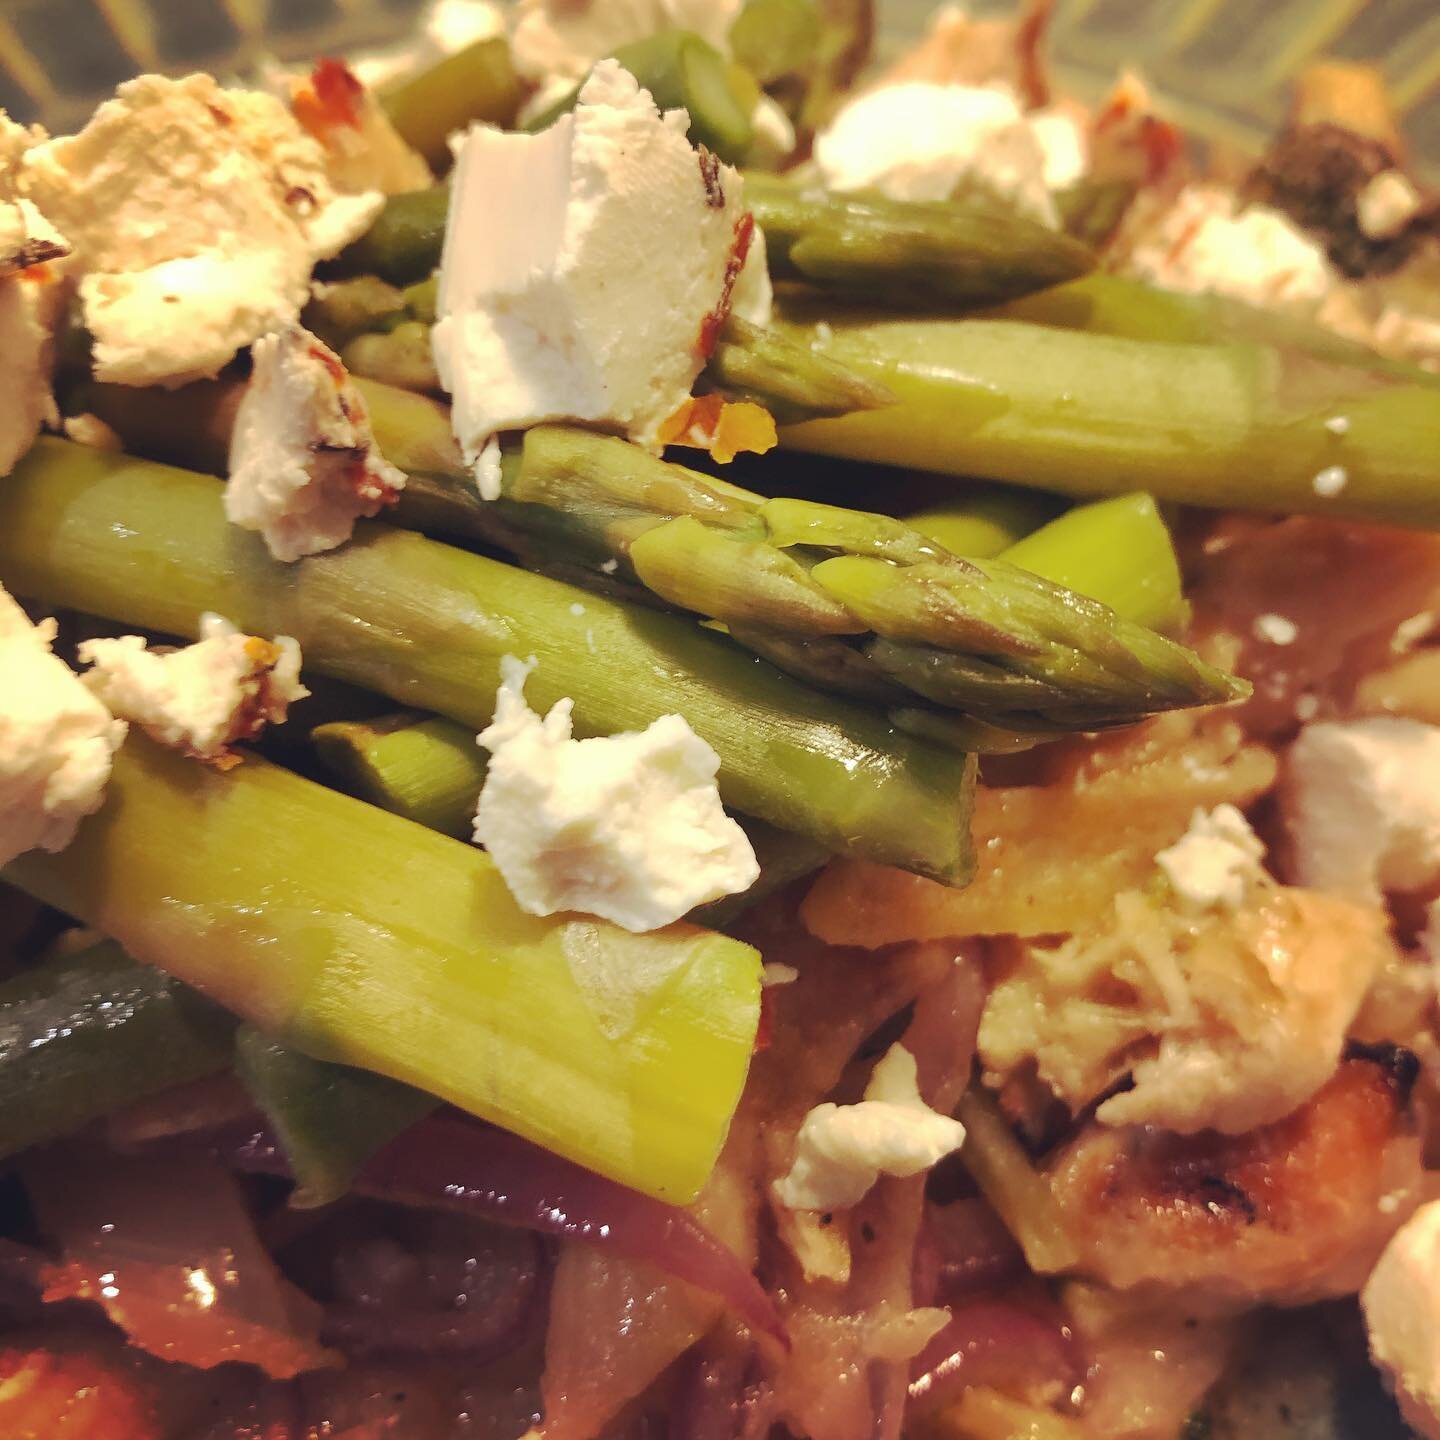 Was craving organic Asparagus so got some from @peruvianofoods and paired with goat cheese, @chickapeapasta, @ladeedagourmetsauces, organic onions and clean chicken @loblawson #organic #glutenfree #eatingwellnesss @craftsight @rythmicdiet #curatingwe